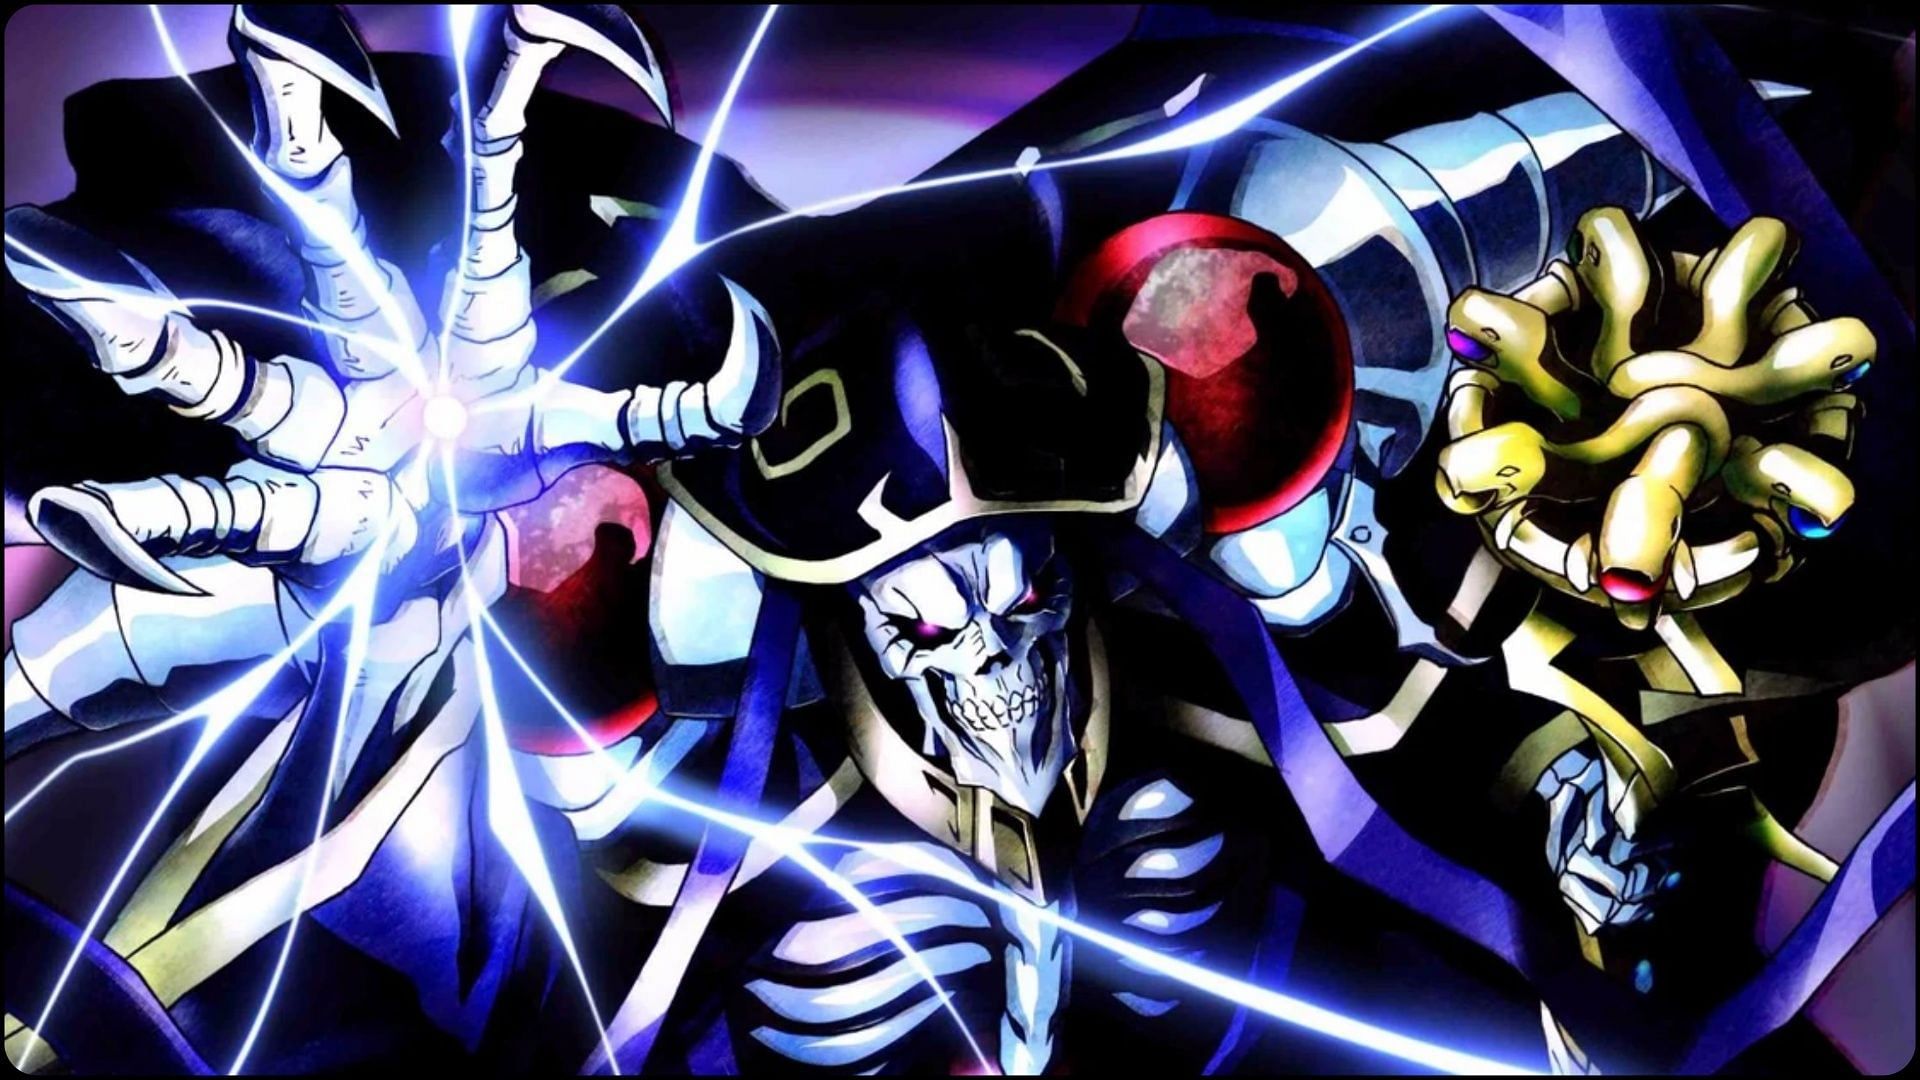 20 Anime Like Overlord [Best Isekai Shows To Watch] - TechShout